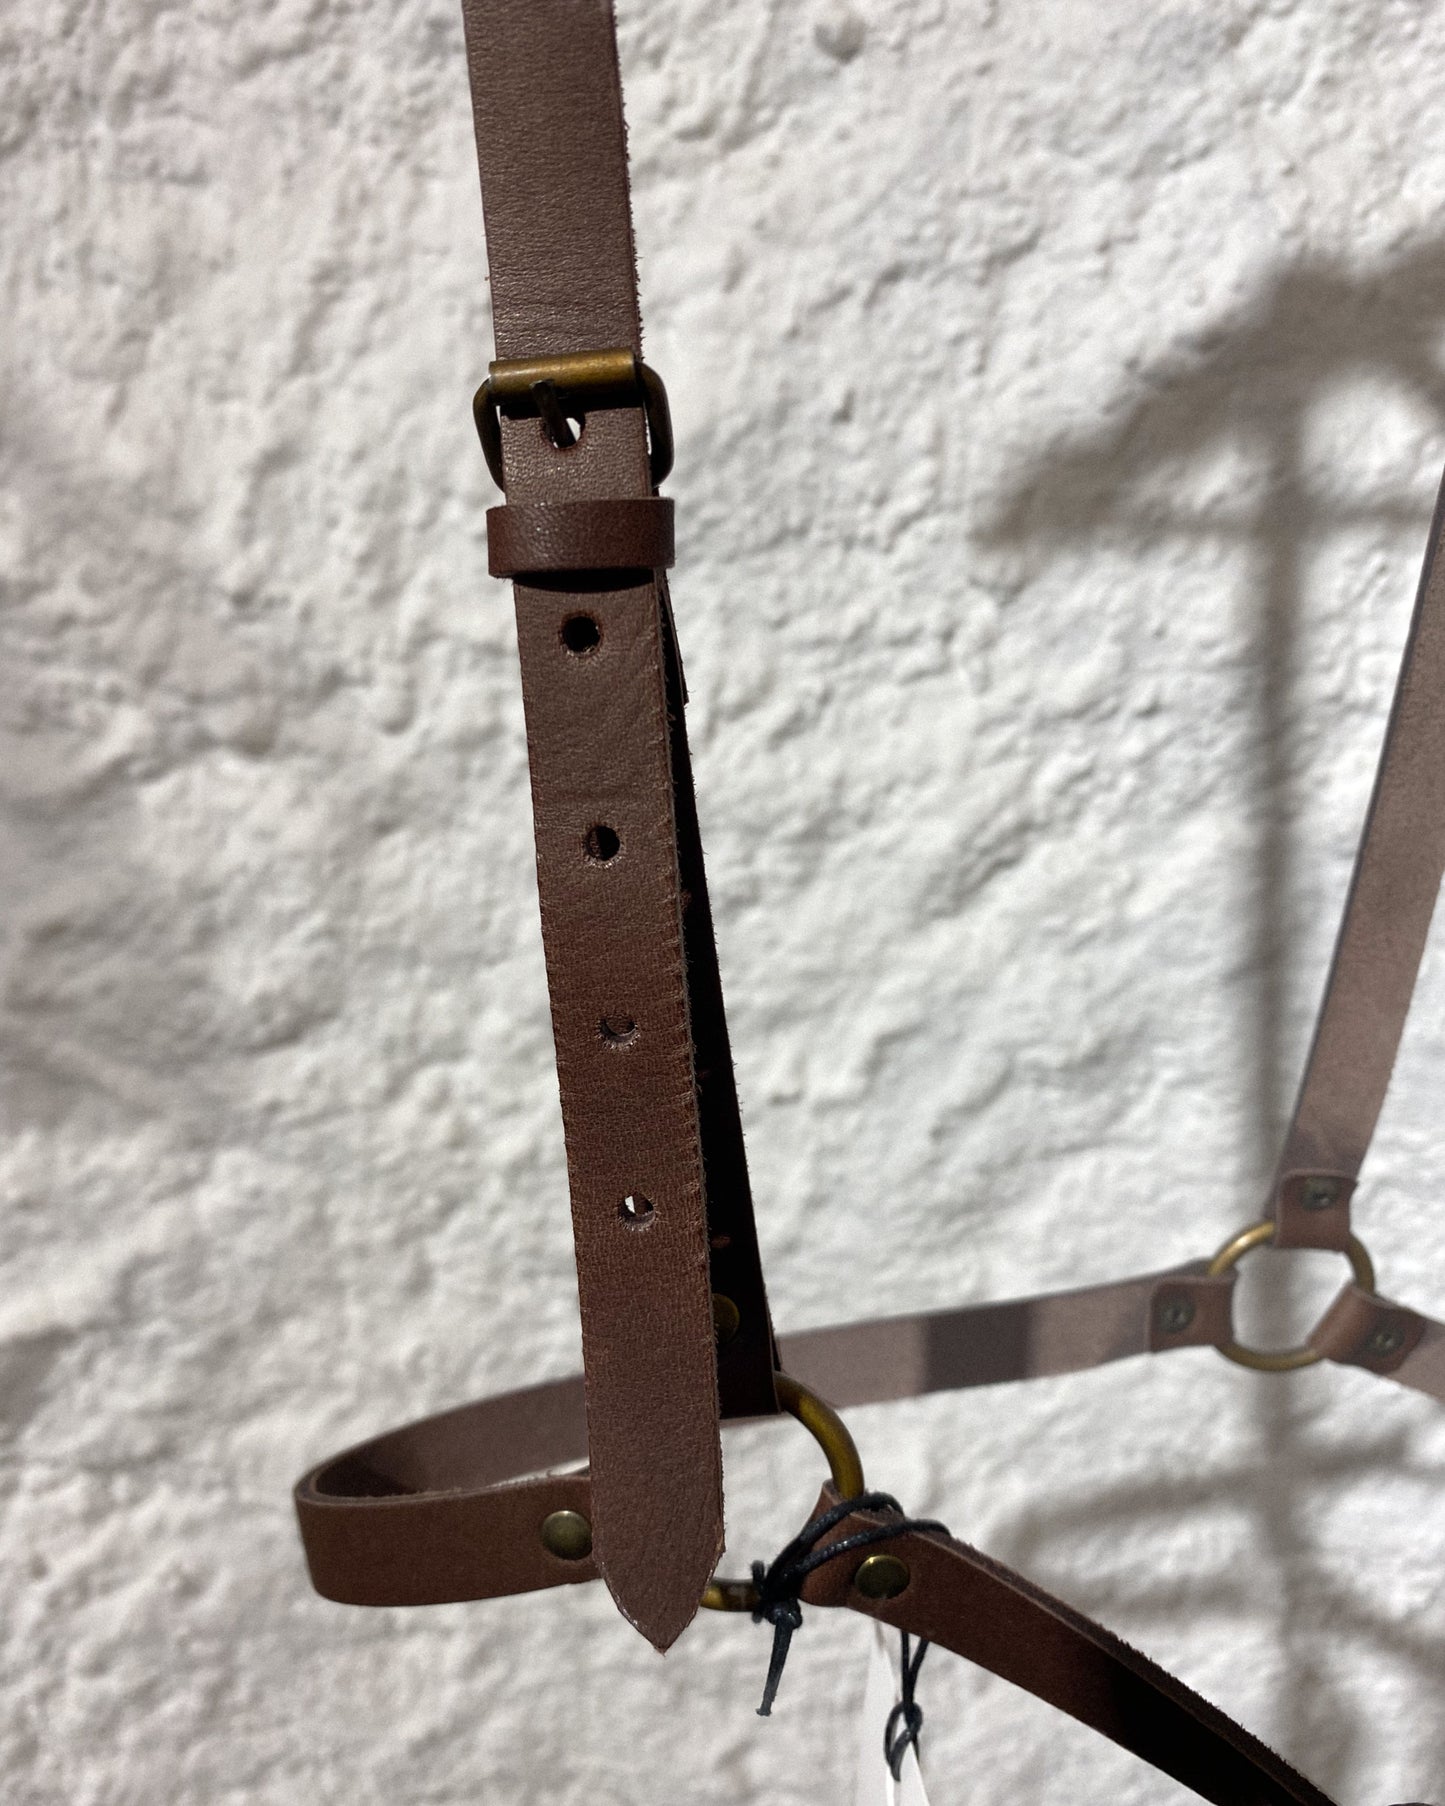 Handcrafted leather harness